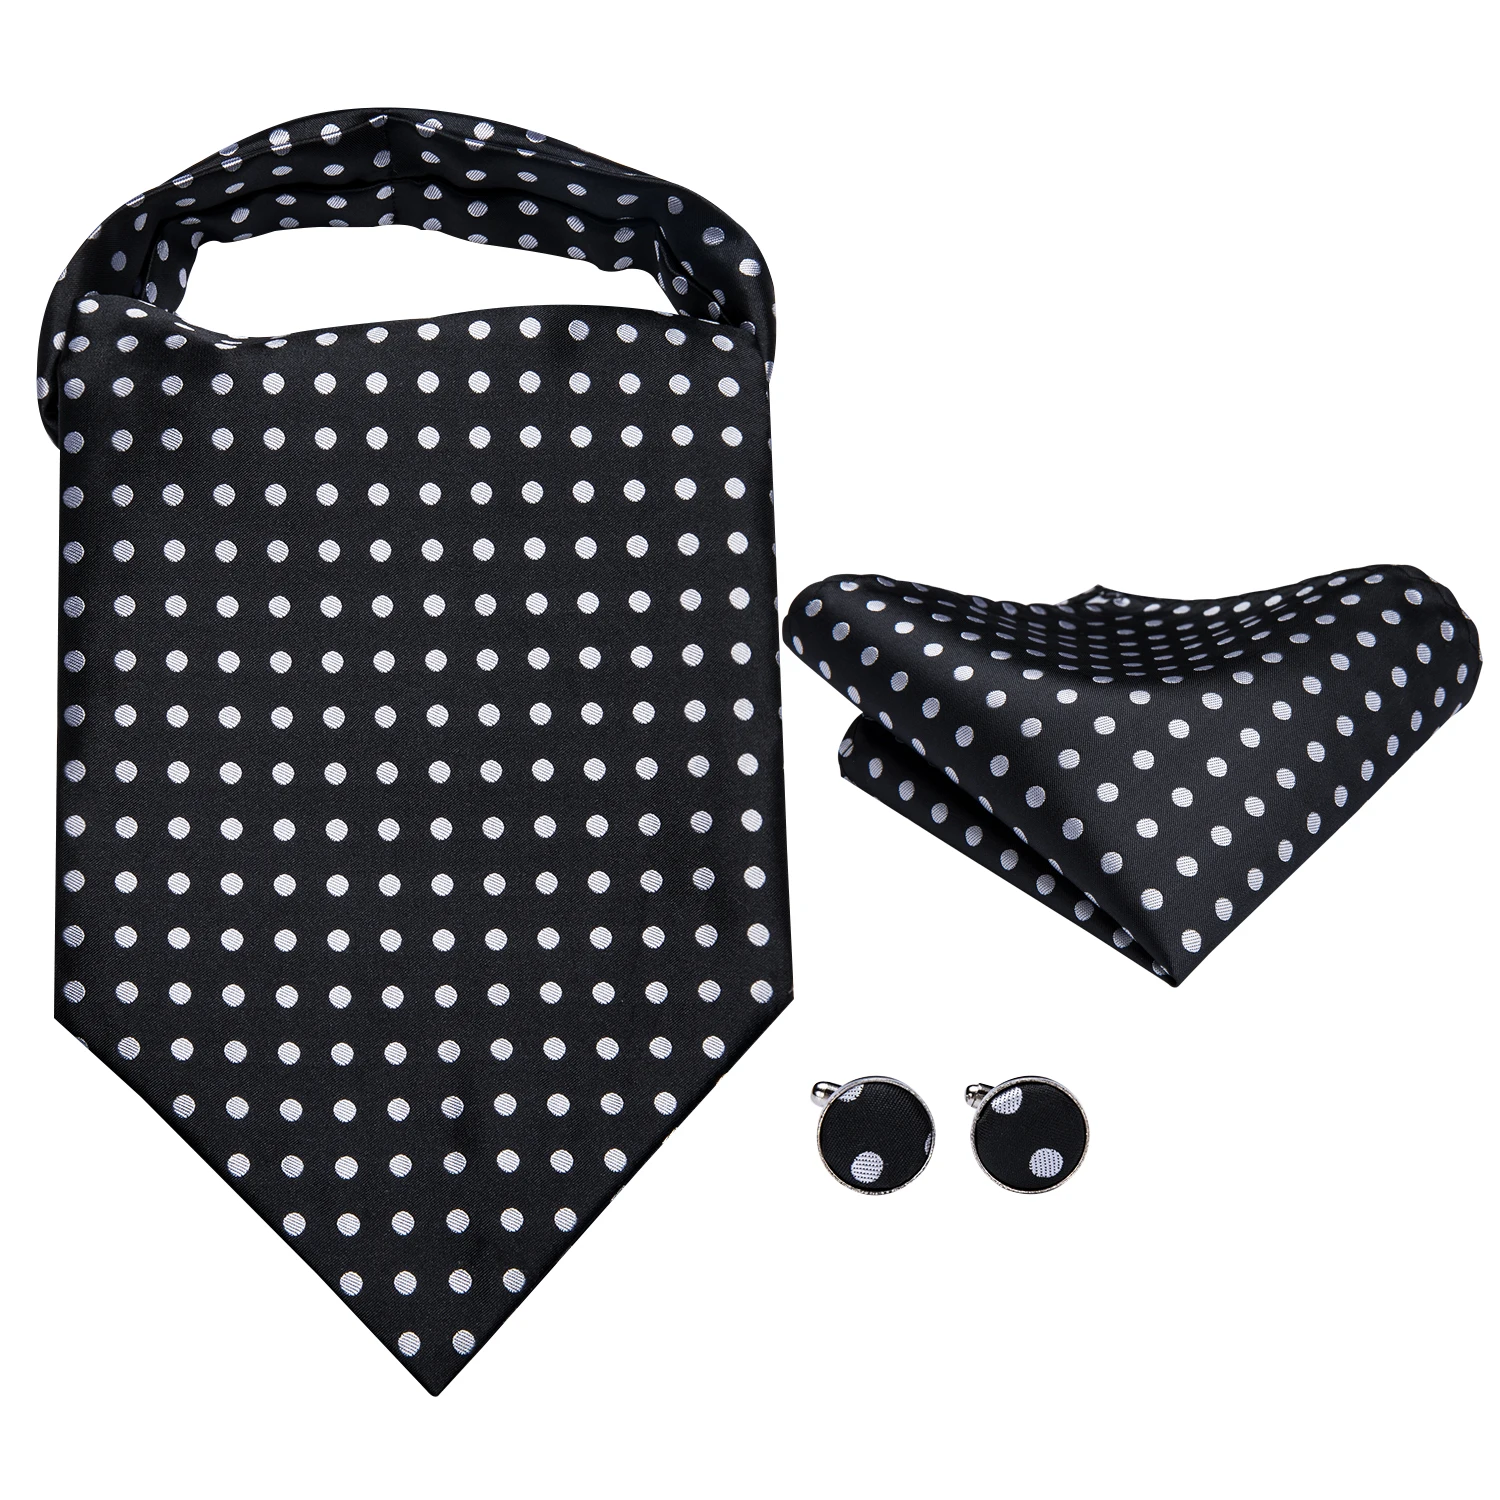 Dotted Wine Neck Tie Gift Set Pocket Square Cuff Links Tie Pin Polka Dot Satin